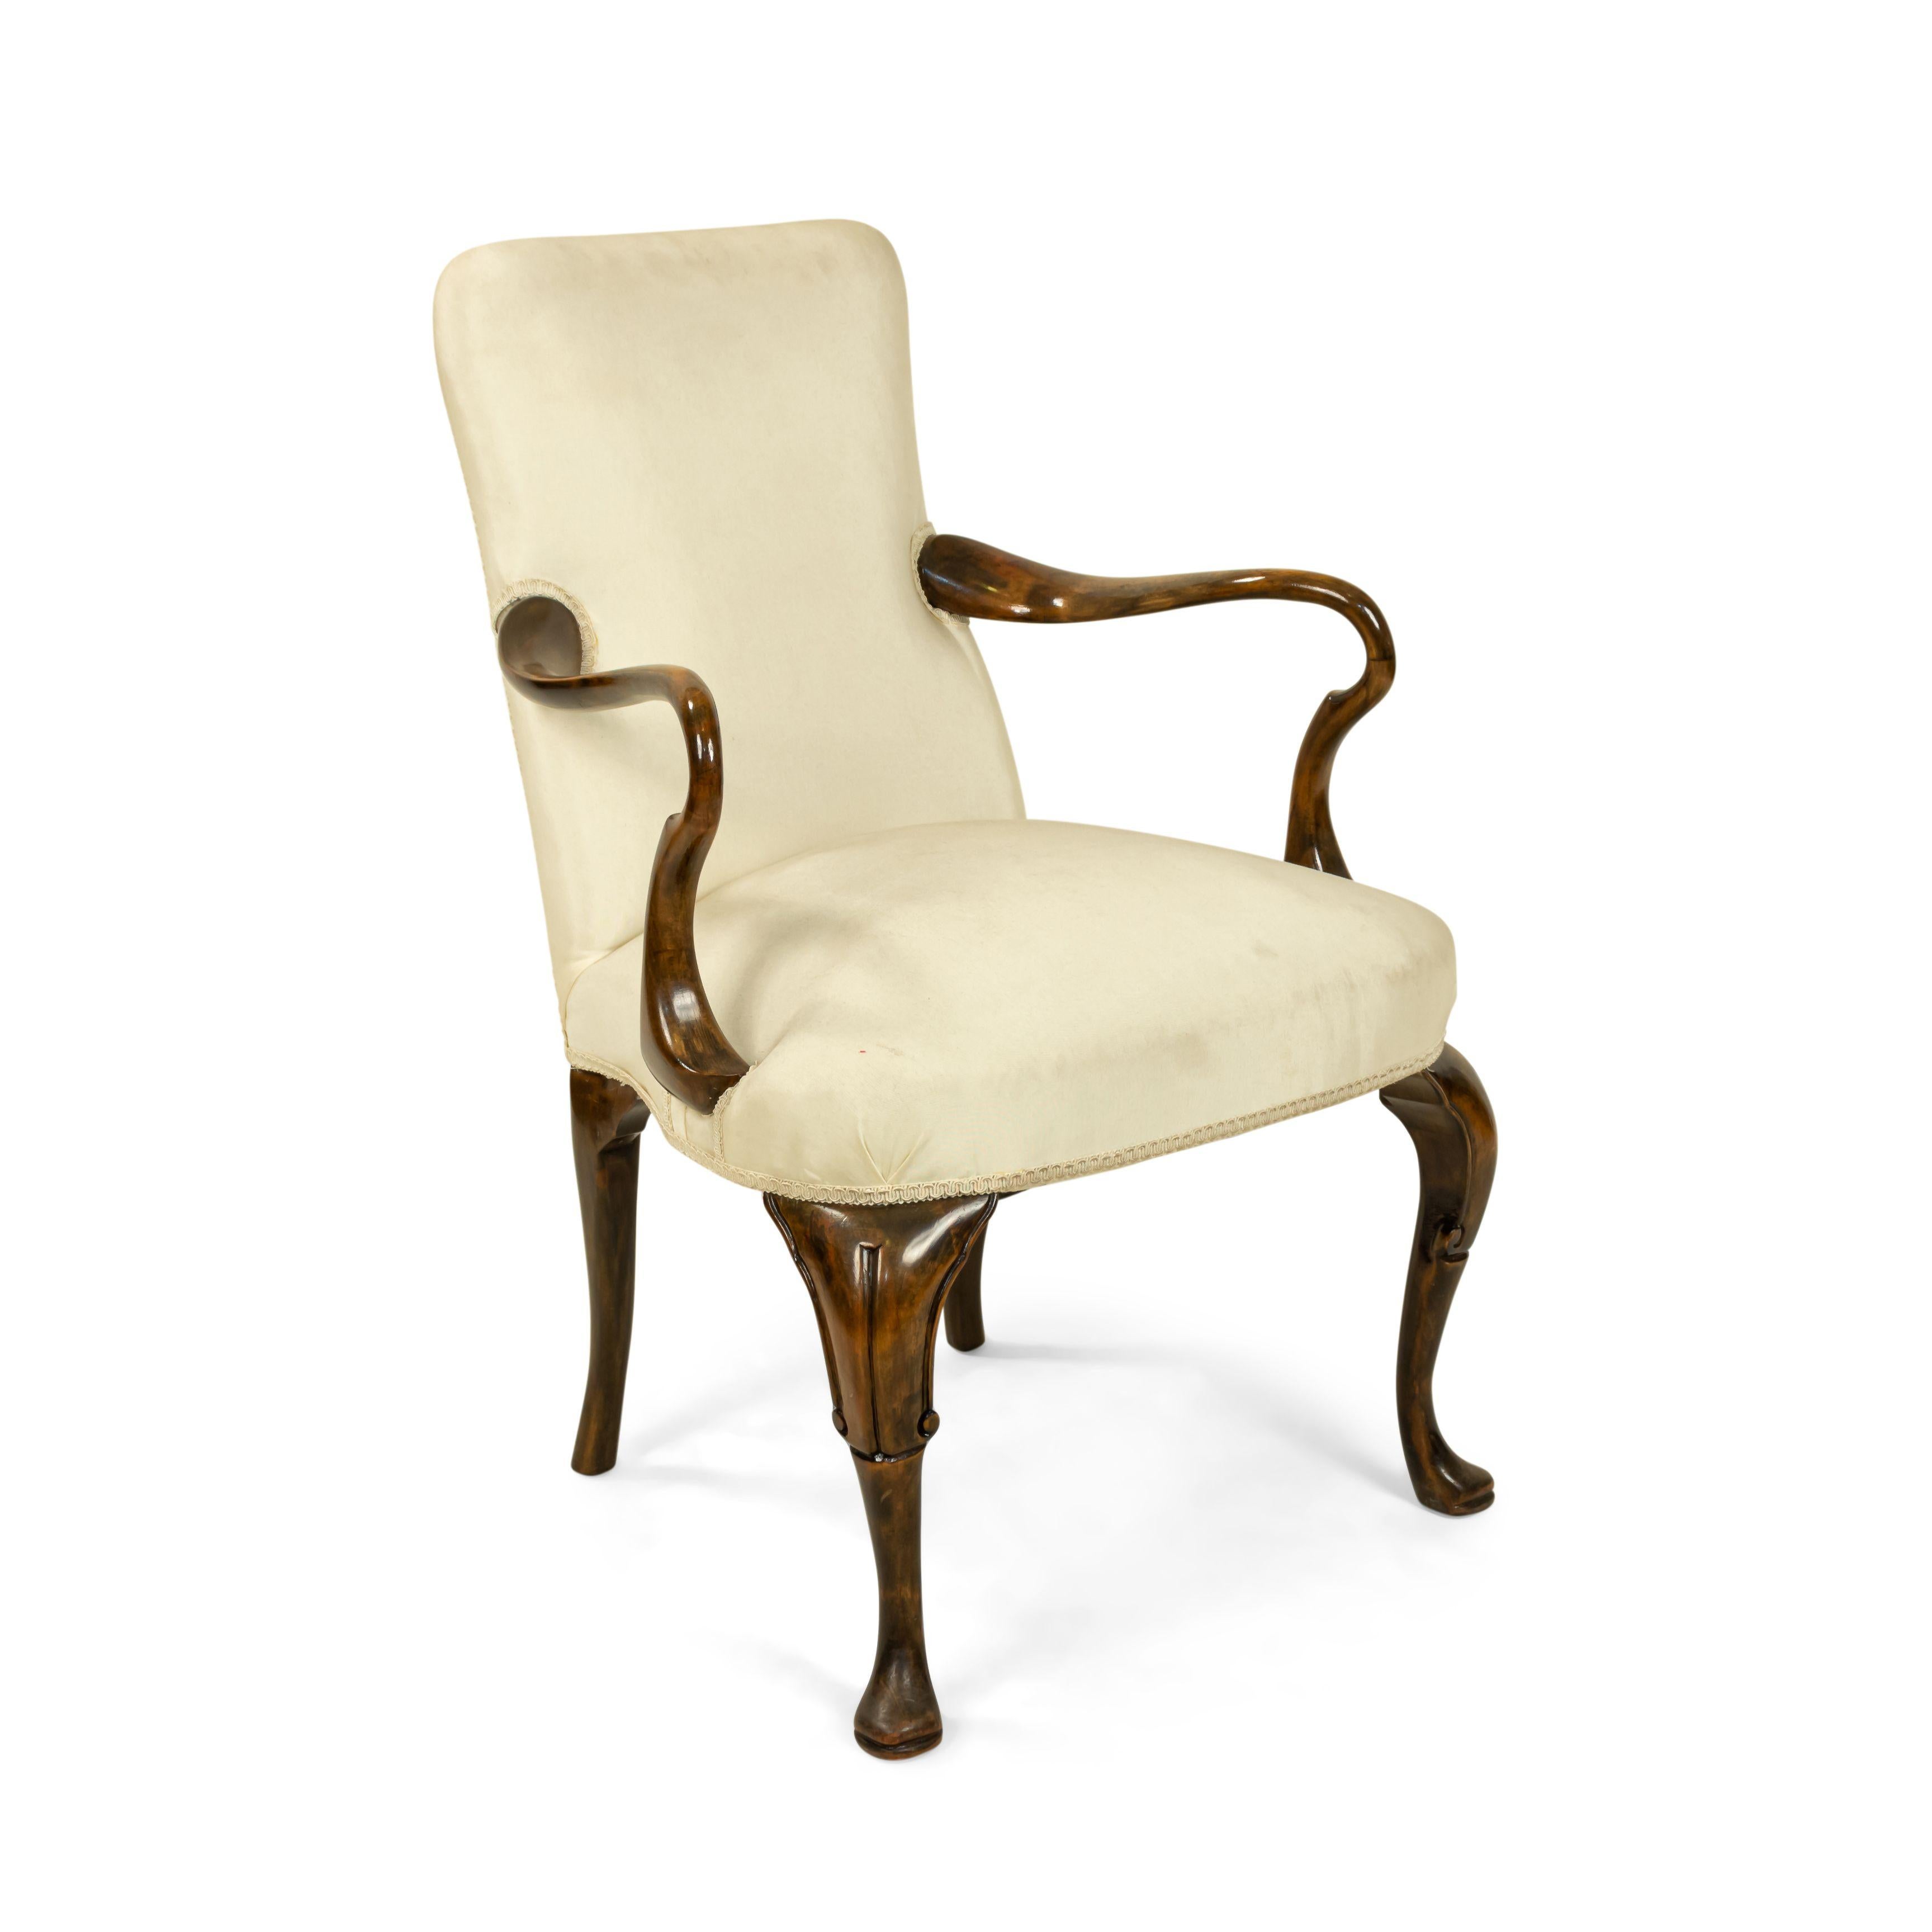 English Queen Anne style (19-20th century) walnut open armchair with white upholstered seat and back. (similar to PPF333A).